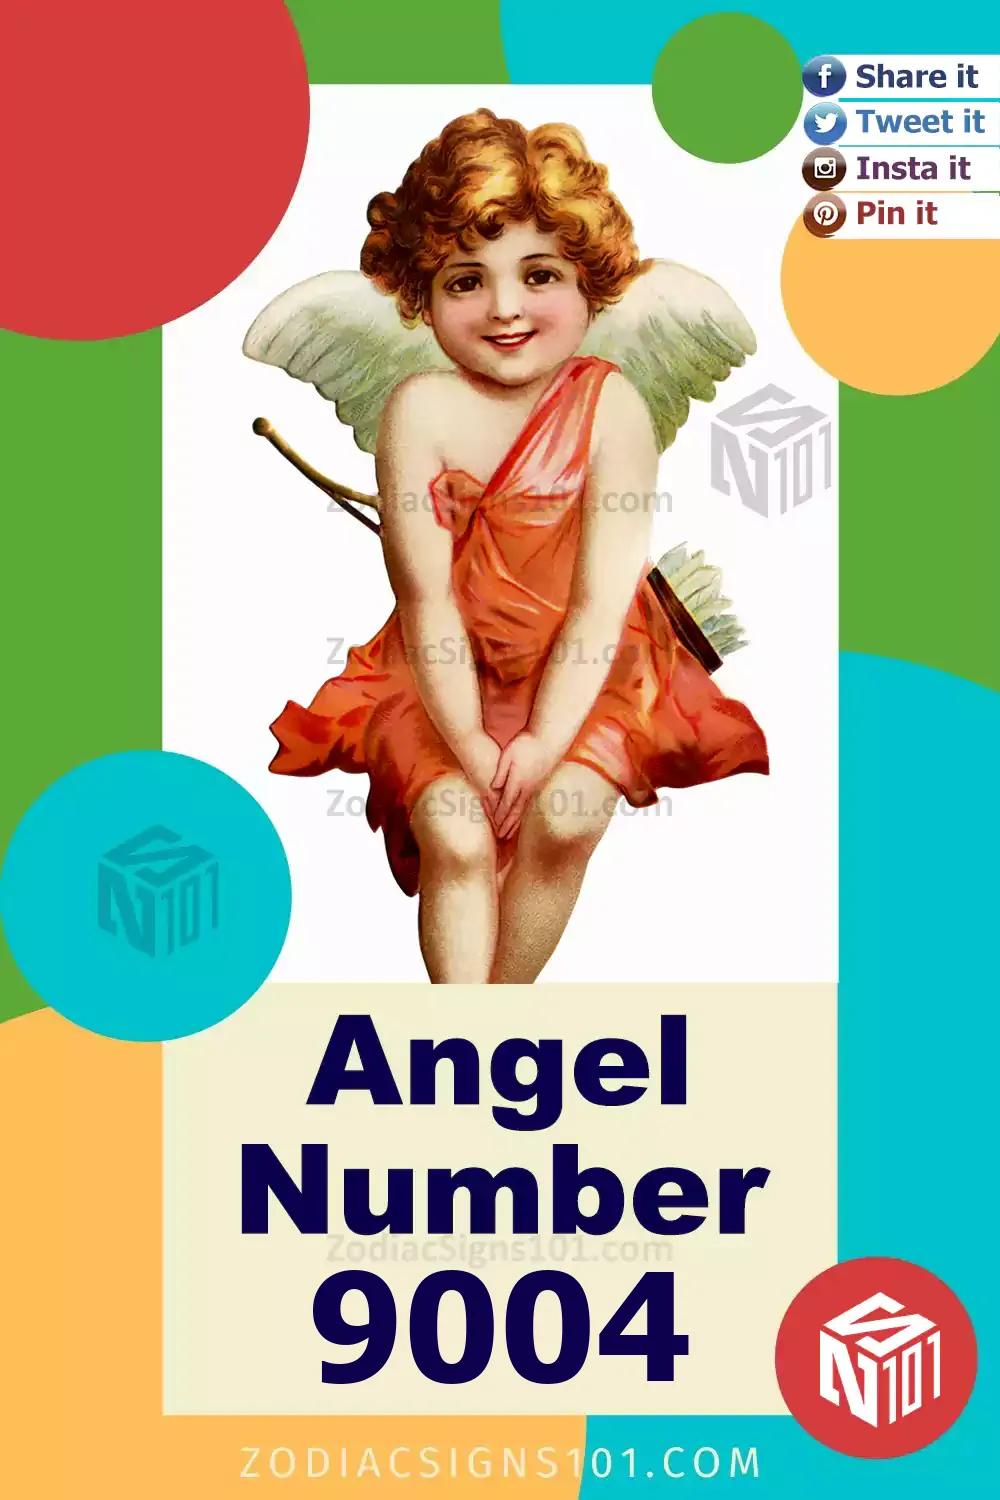 9004 Angel Number Meaning